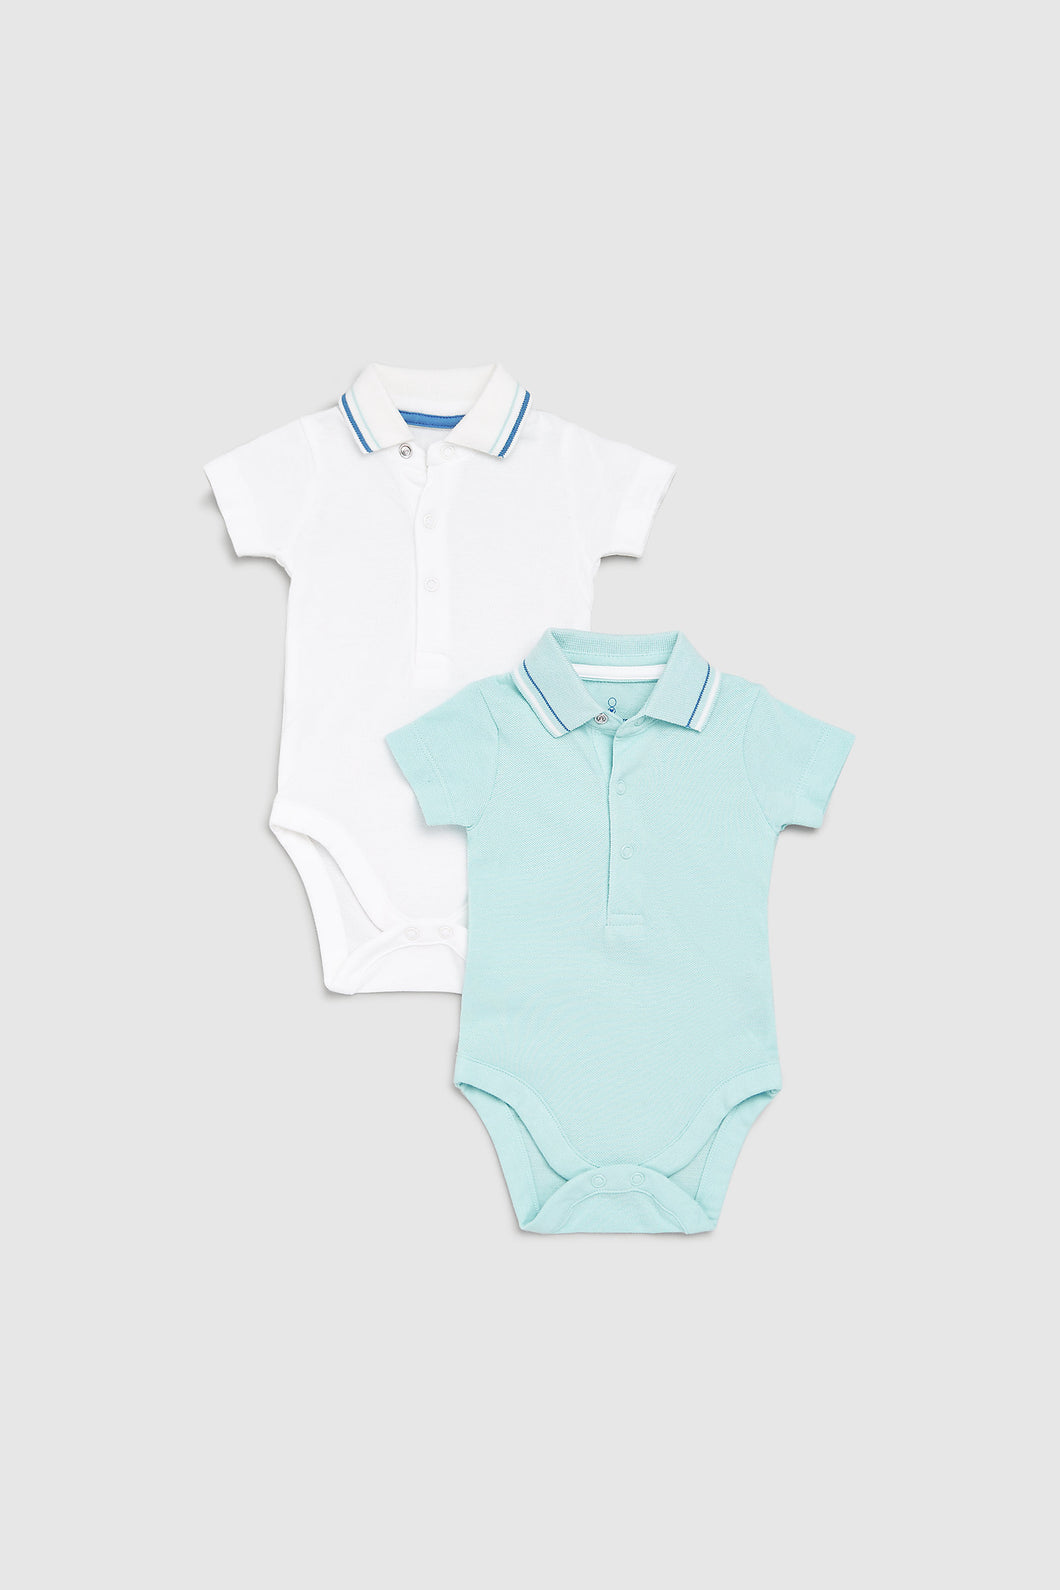 Mothercare Polo Bodysuits - 2 Pack